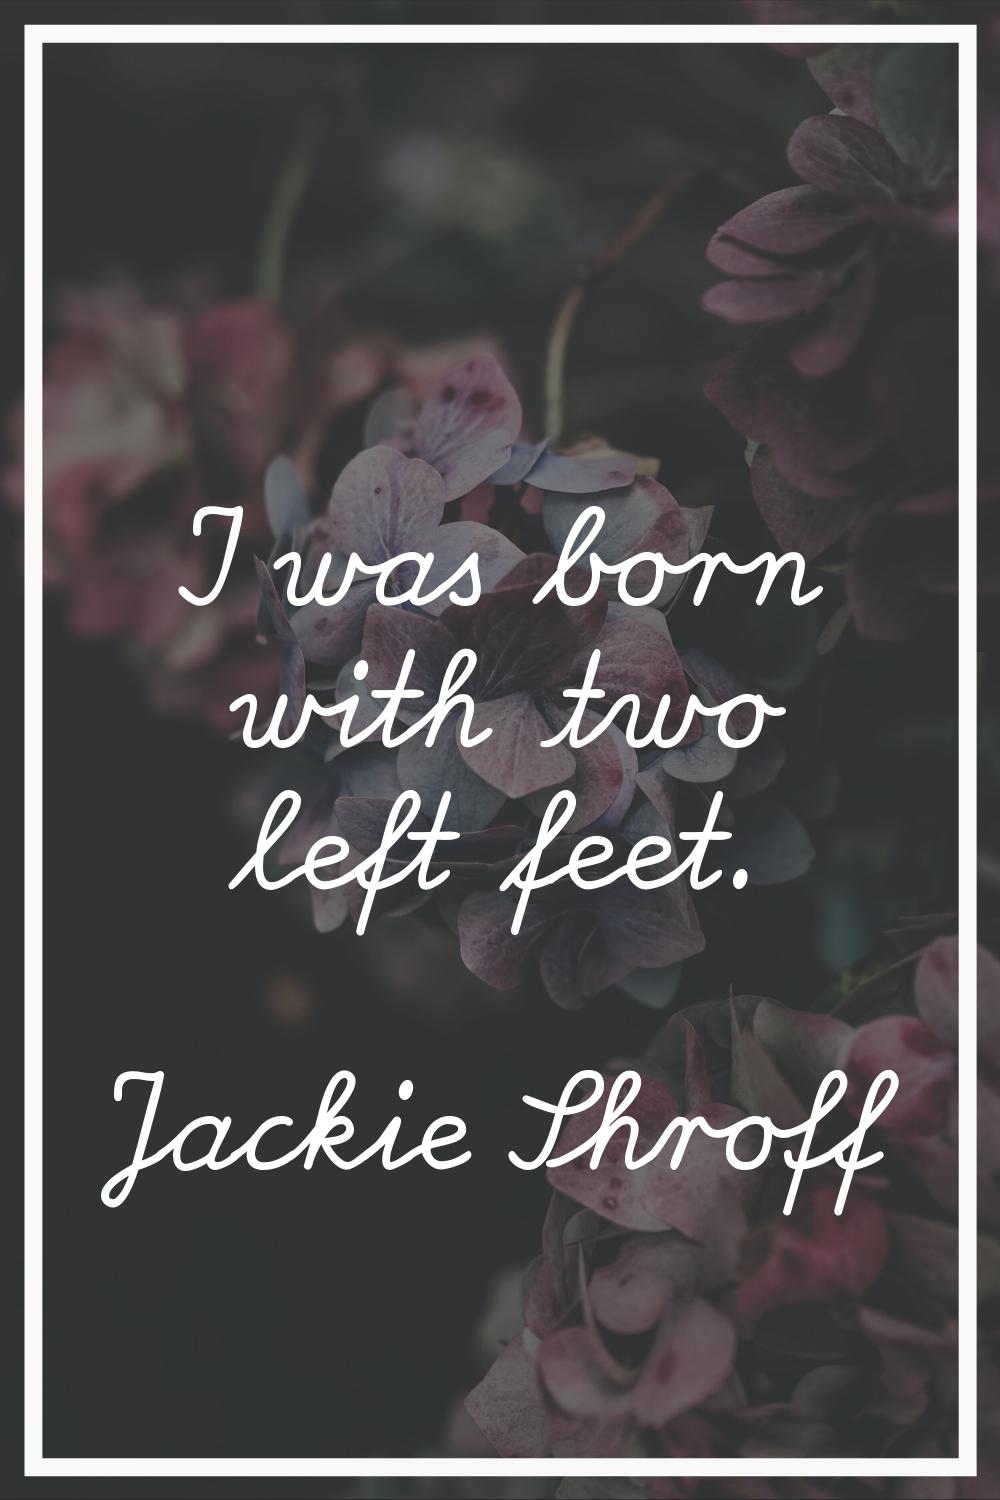 I was born with two left feet.